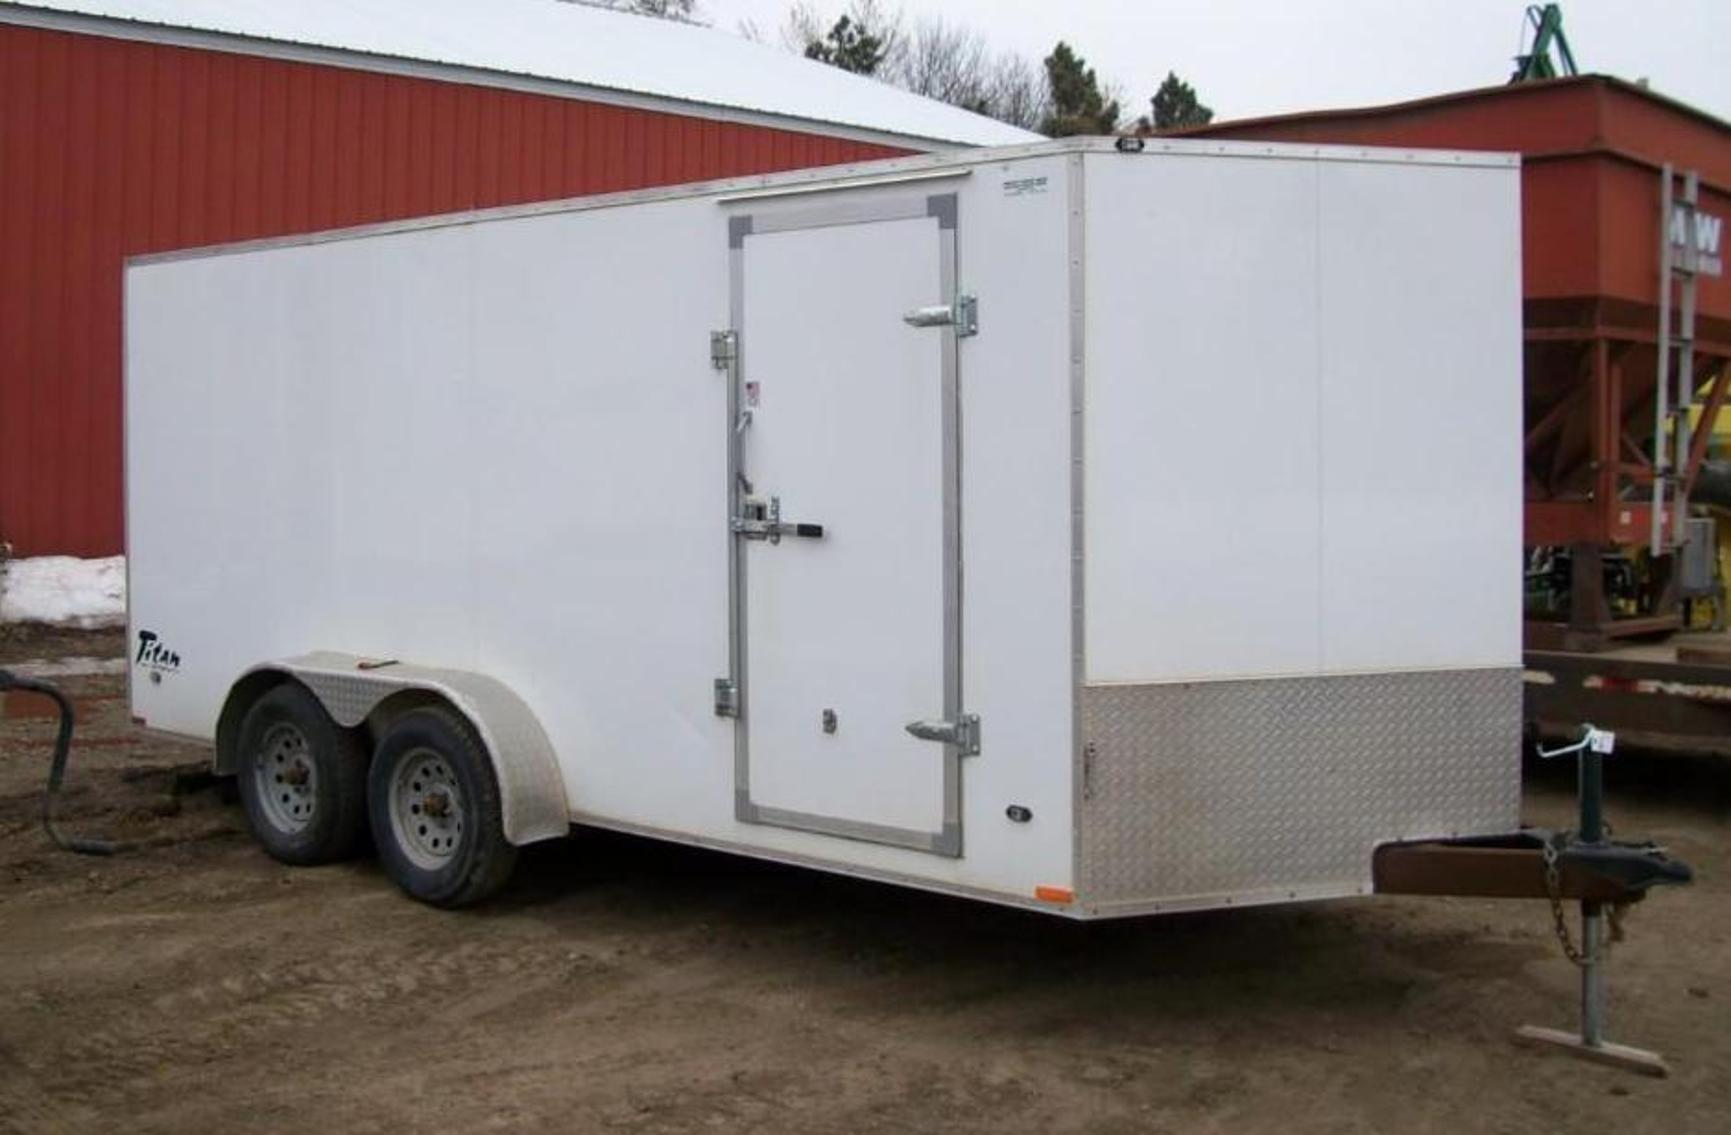 2015 Can-Am Commander 800XT & 2013 Stealth Enclosed Trailer